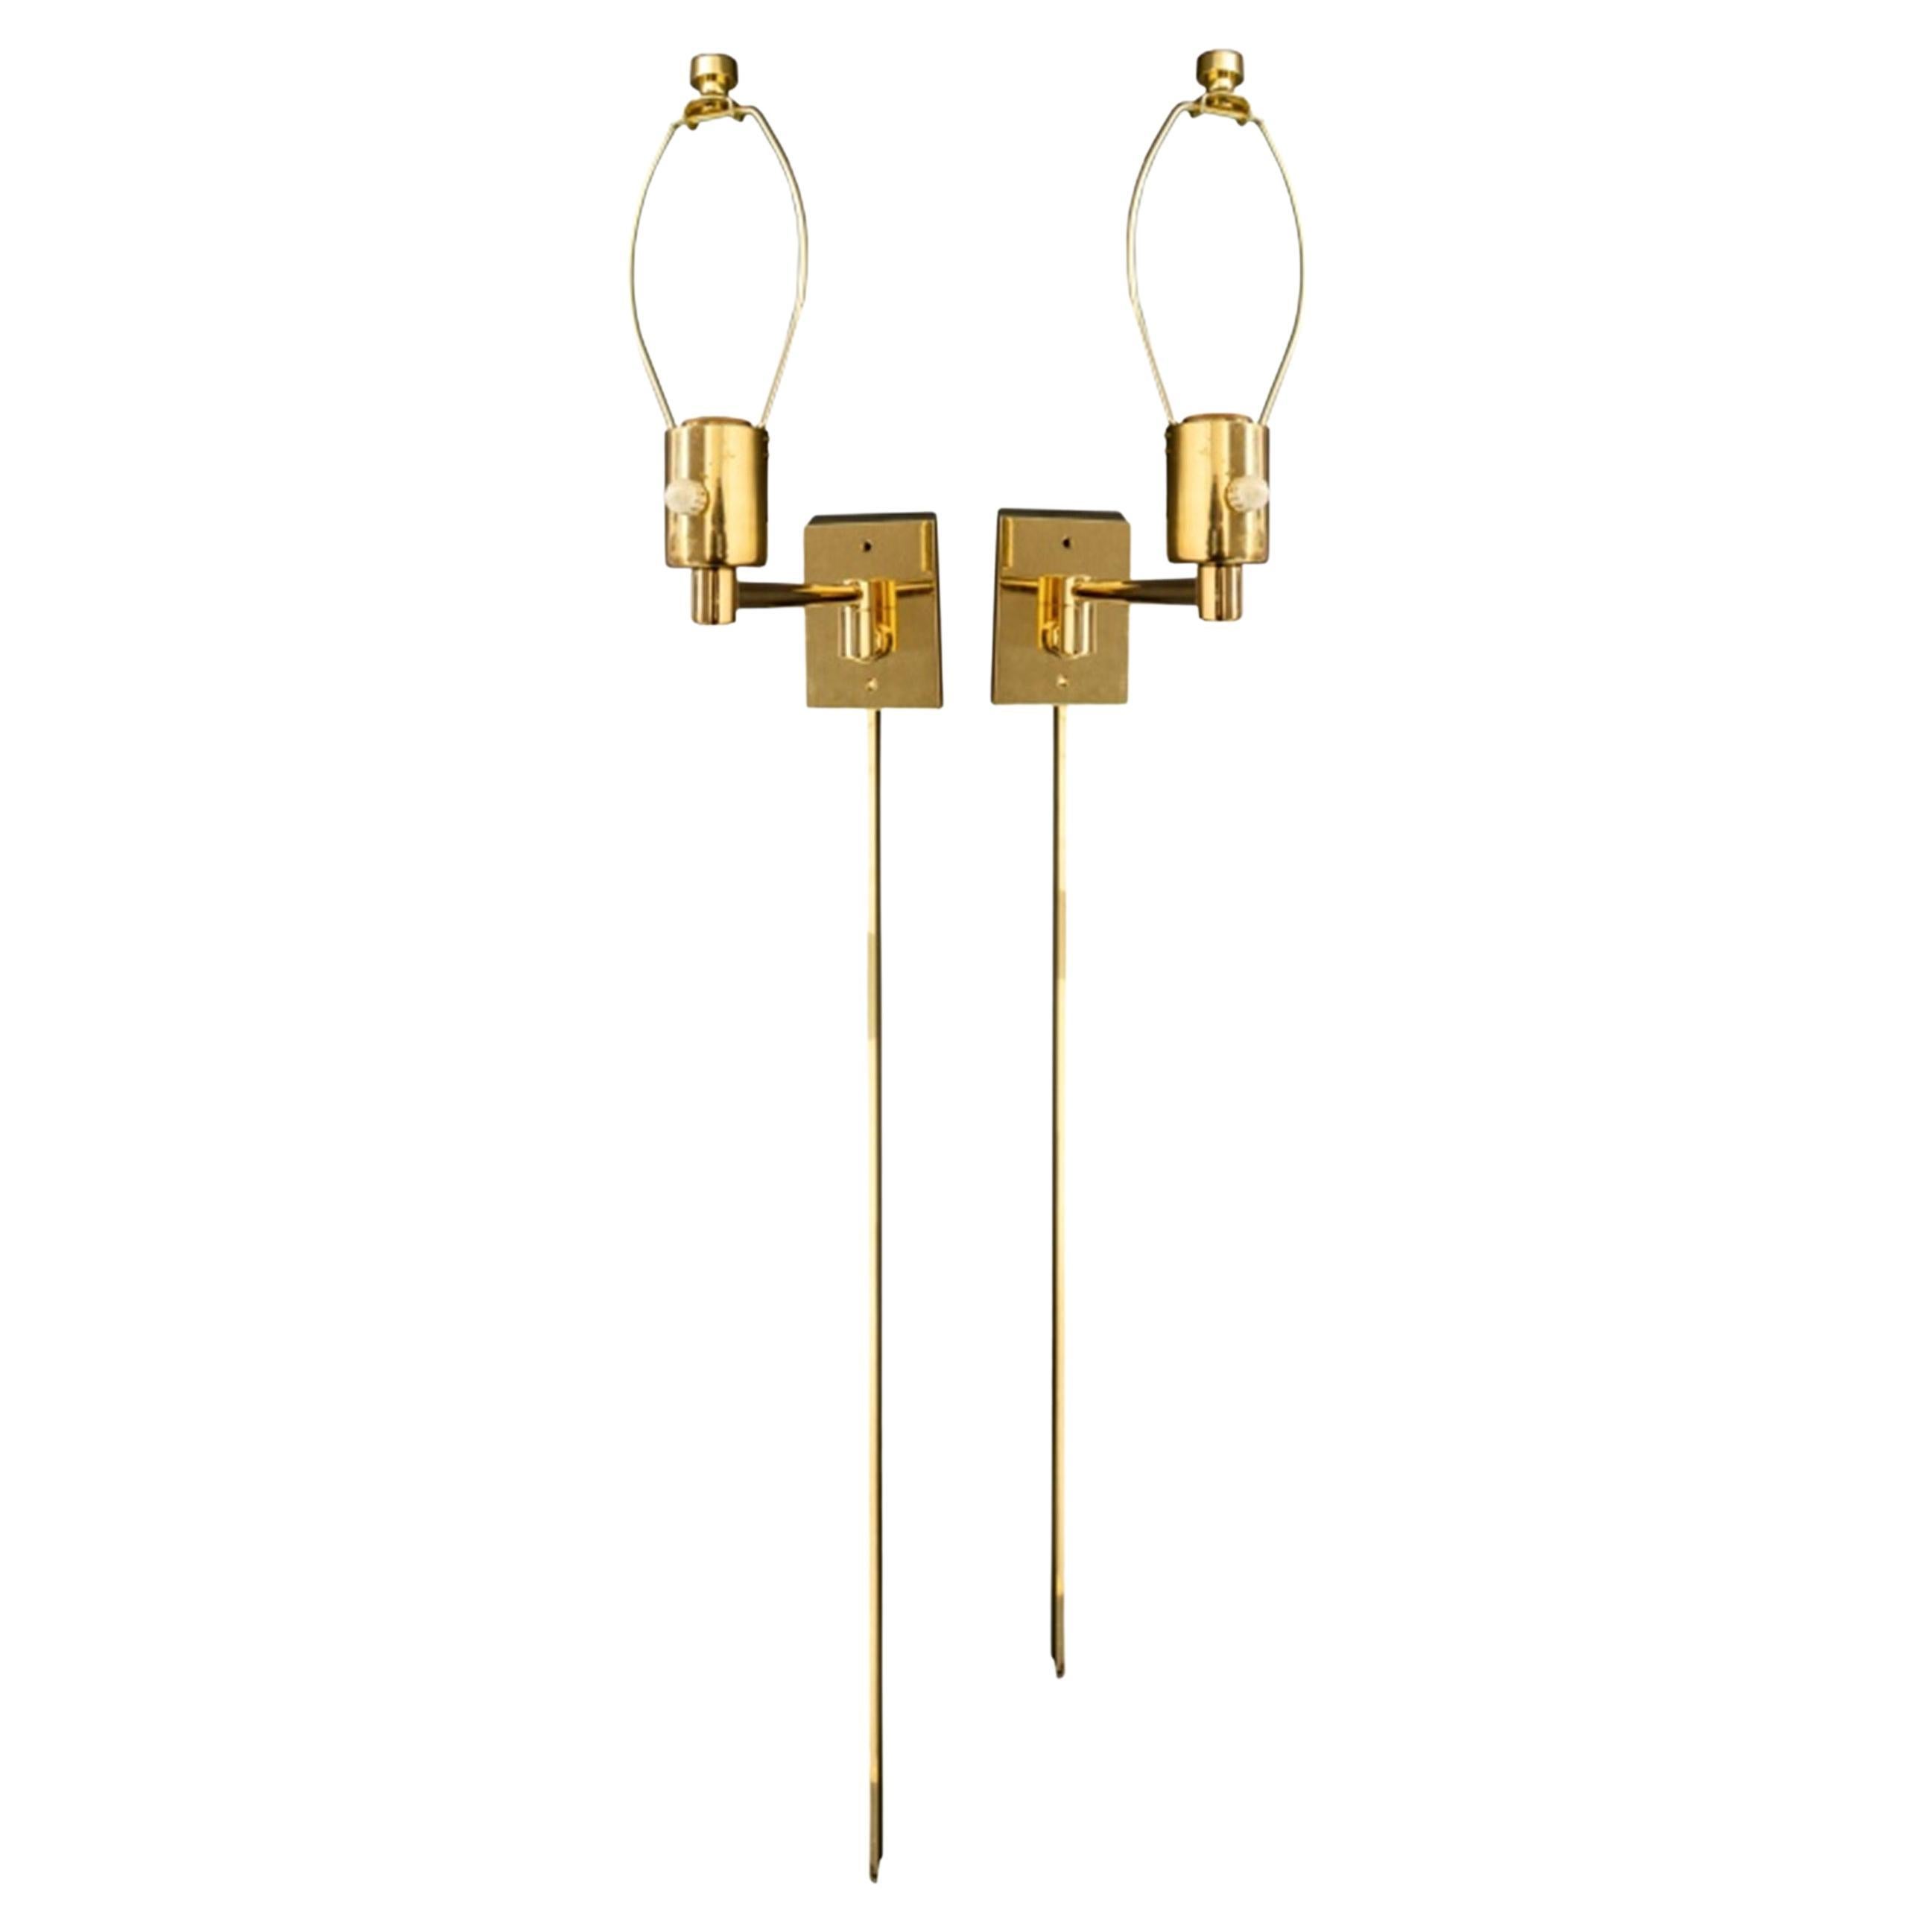 George Hansen Brass Swing Arm Lamps for Hinson, Pair For Sale